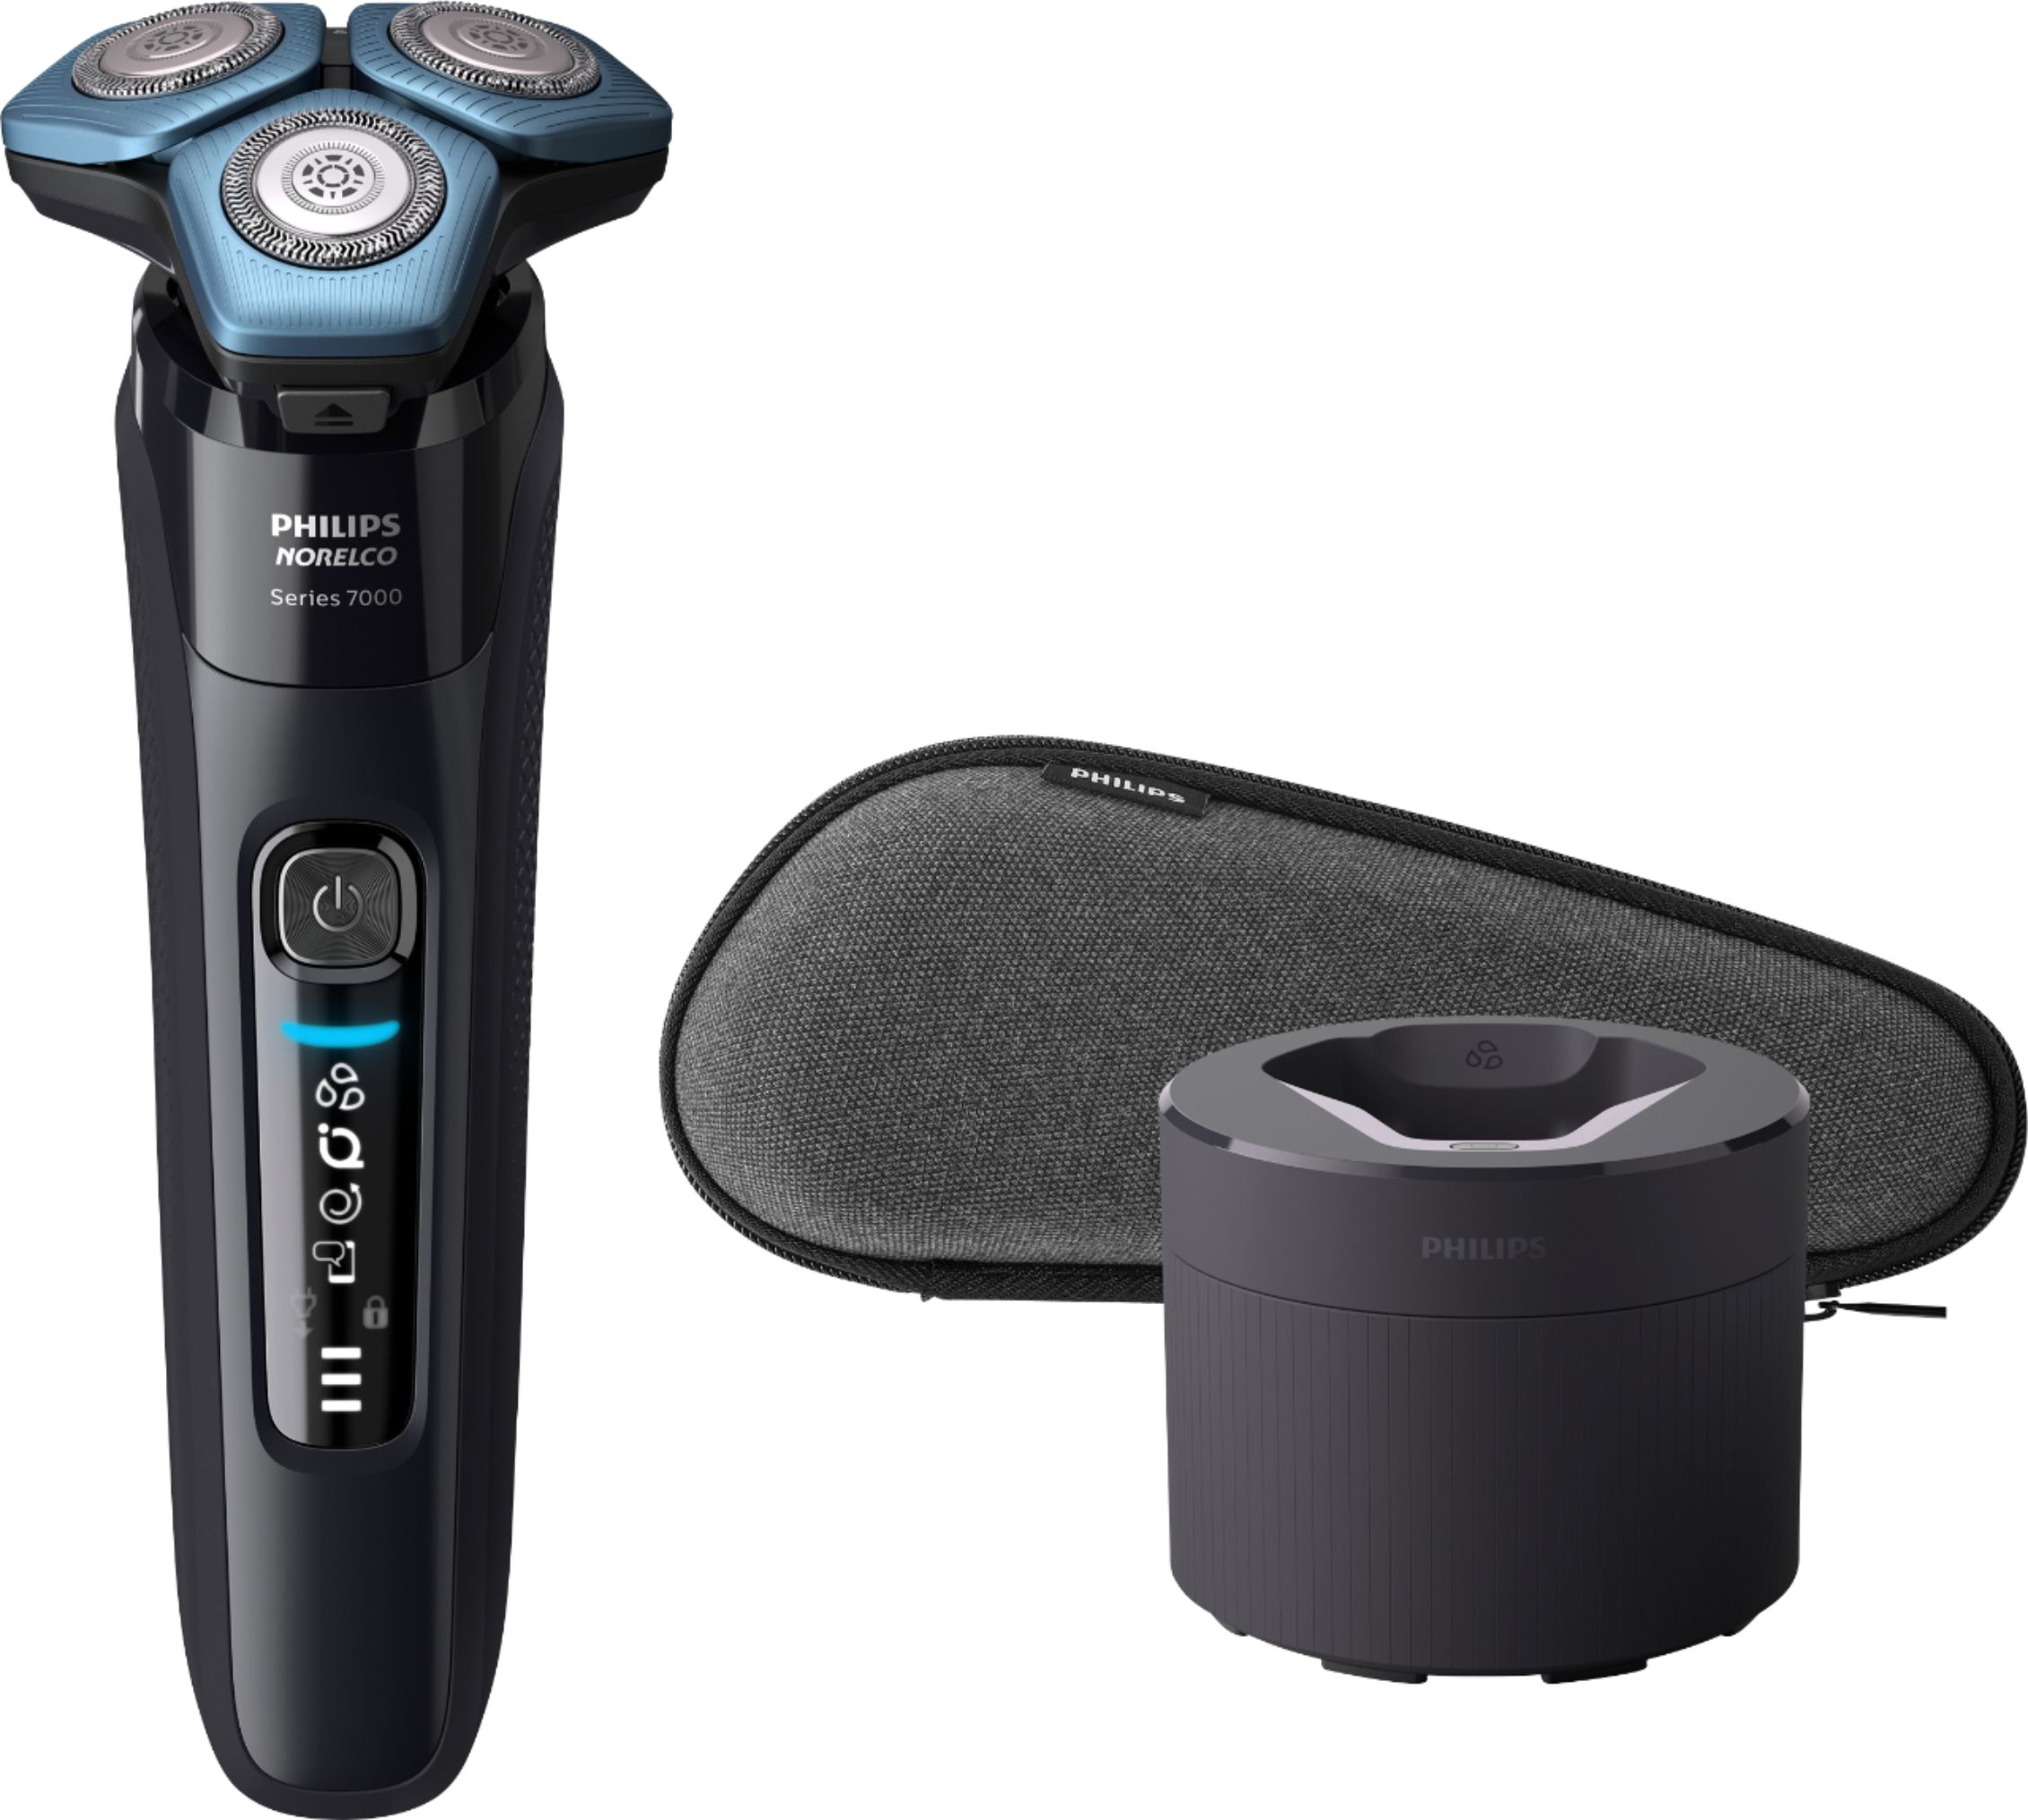 Philips Norelco Shaver 7500, Rechargeable Wet & Dry Electric Shaver with SenseIQ Technology - Ink Black